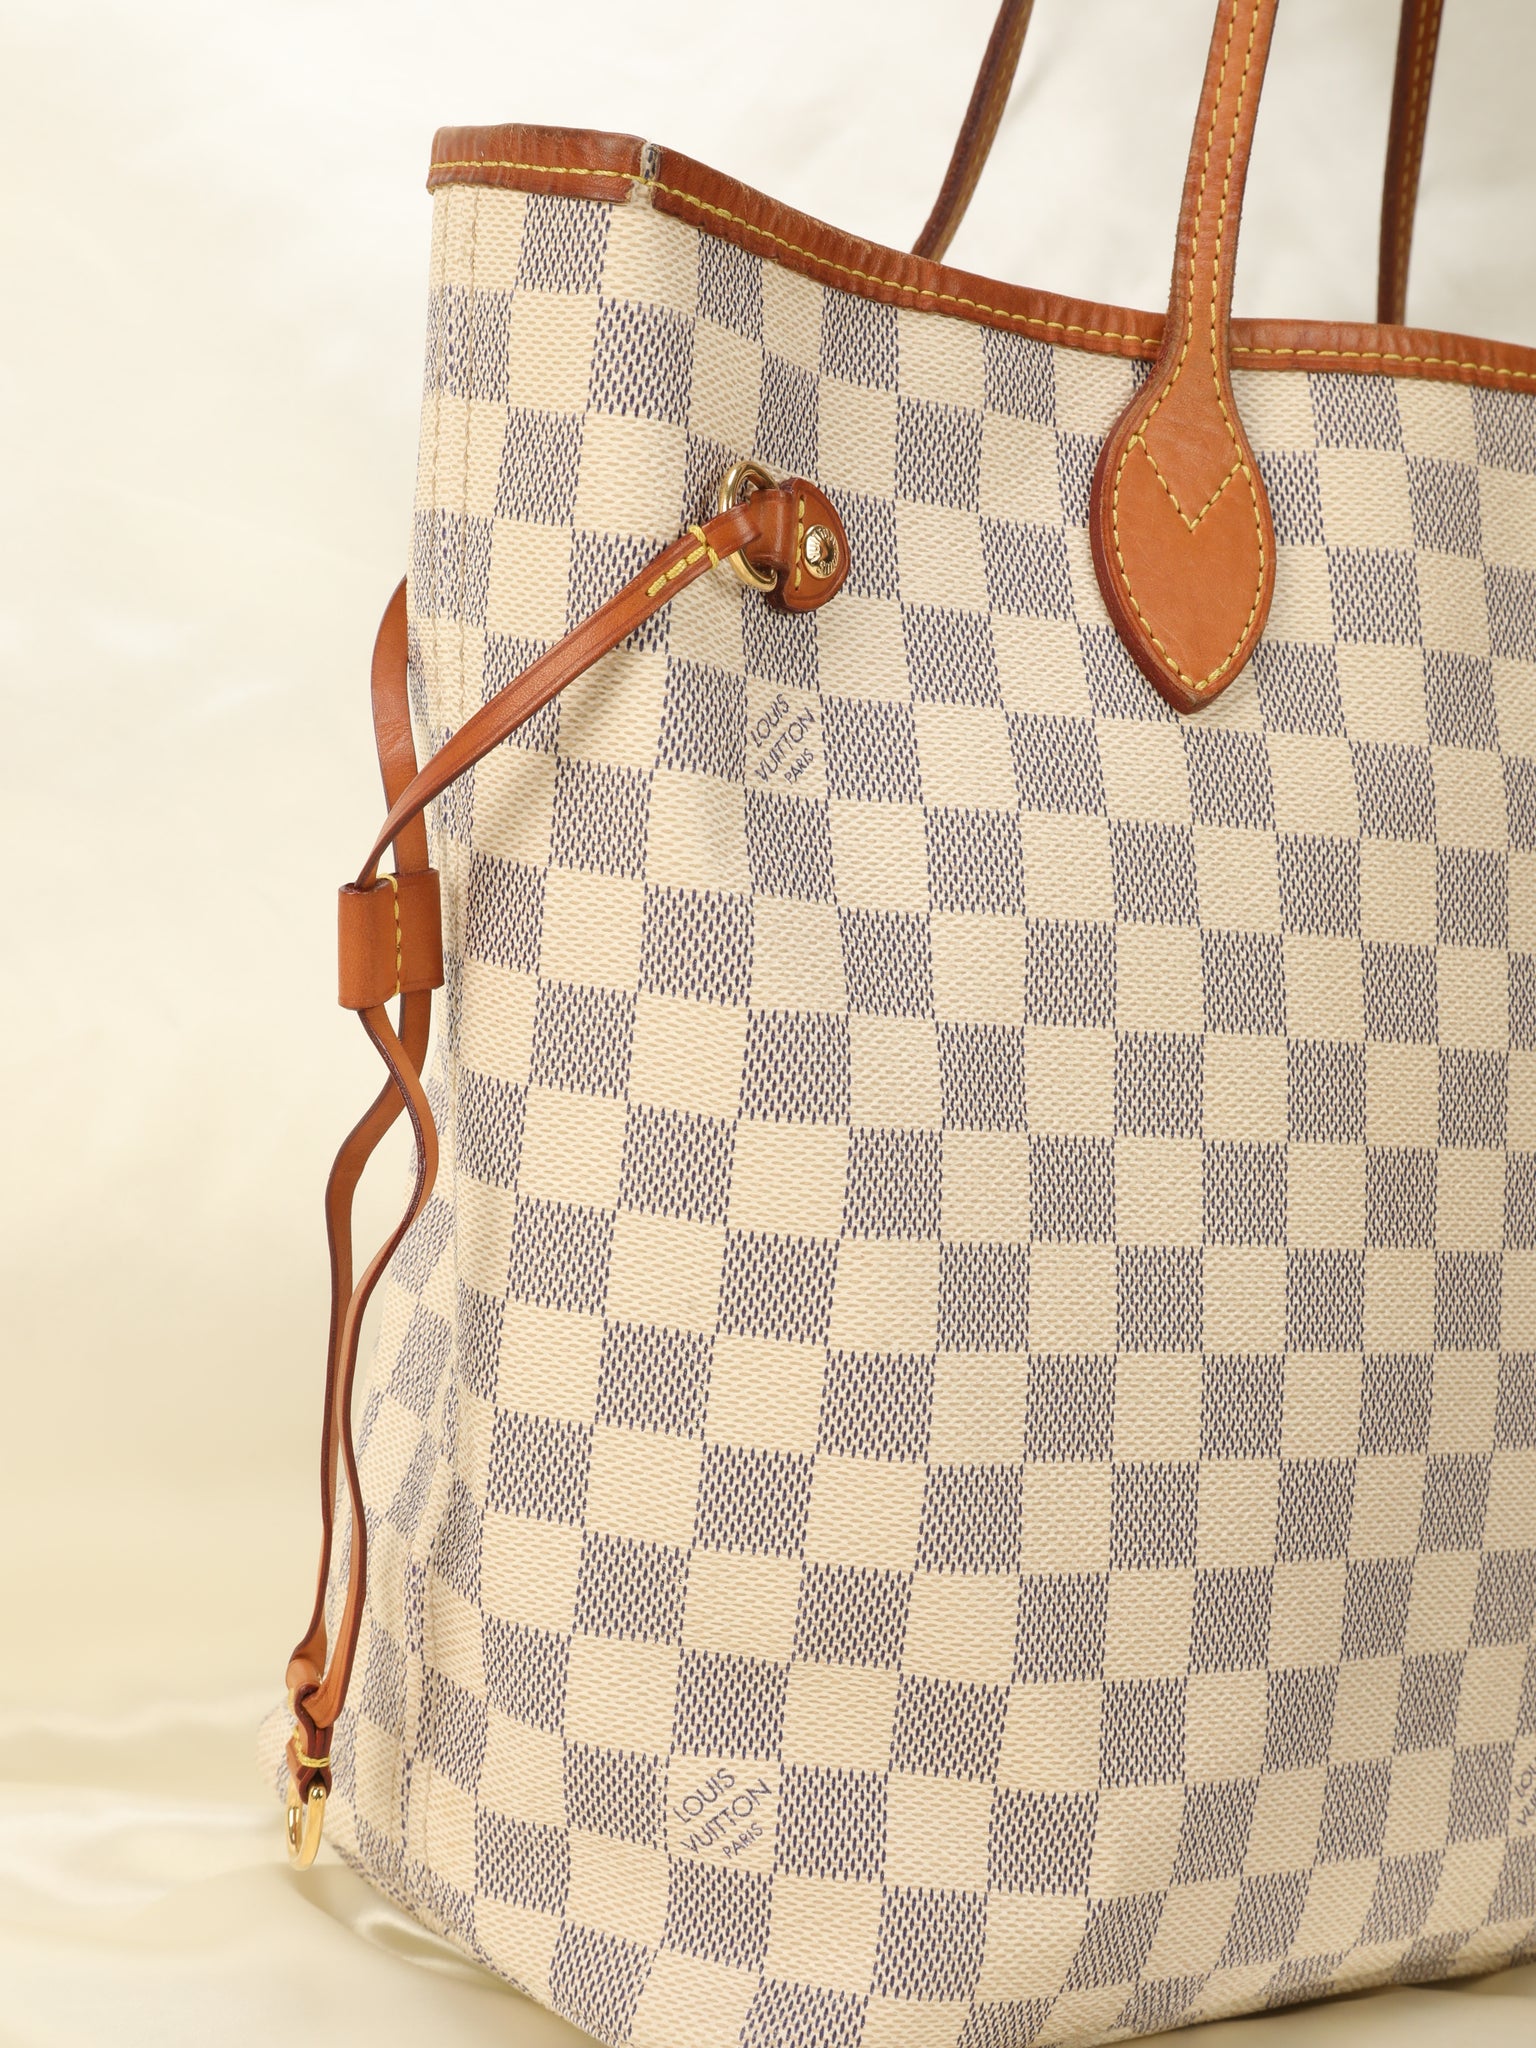 Louis Vuitton Neverfull Damier Azur MM review+Bag collection update